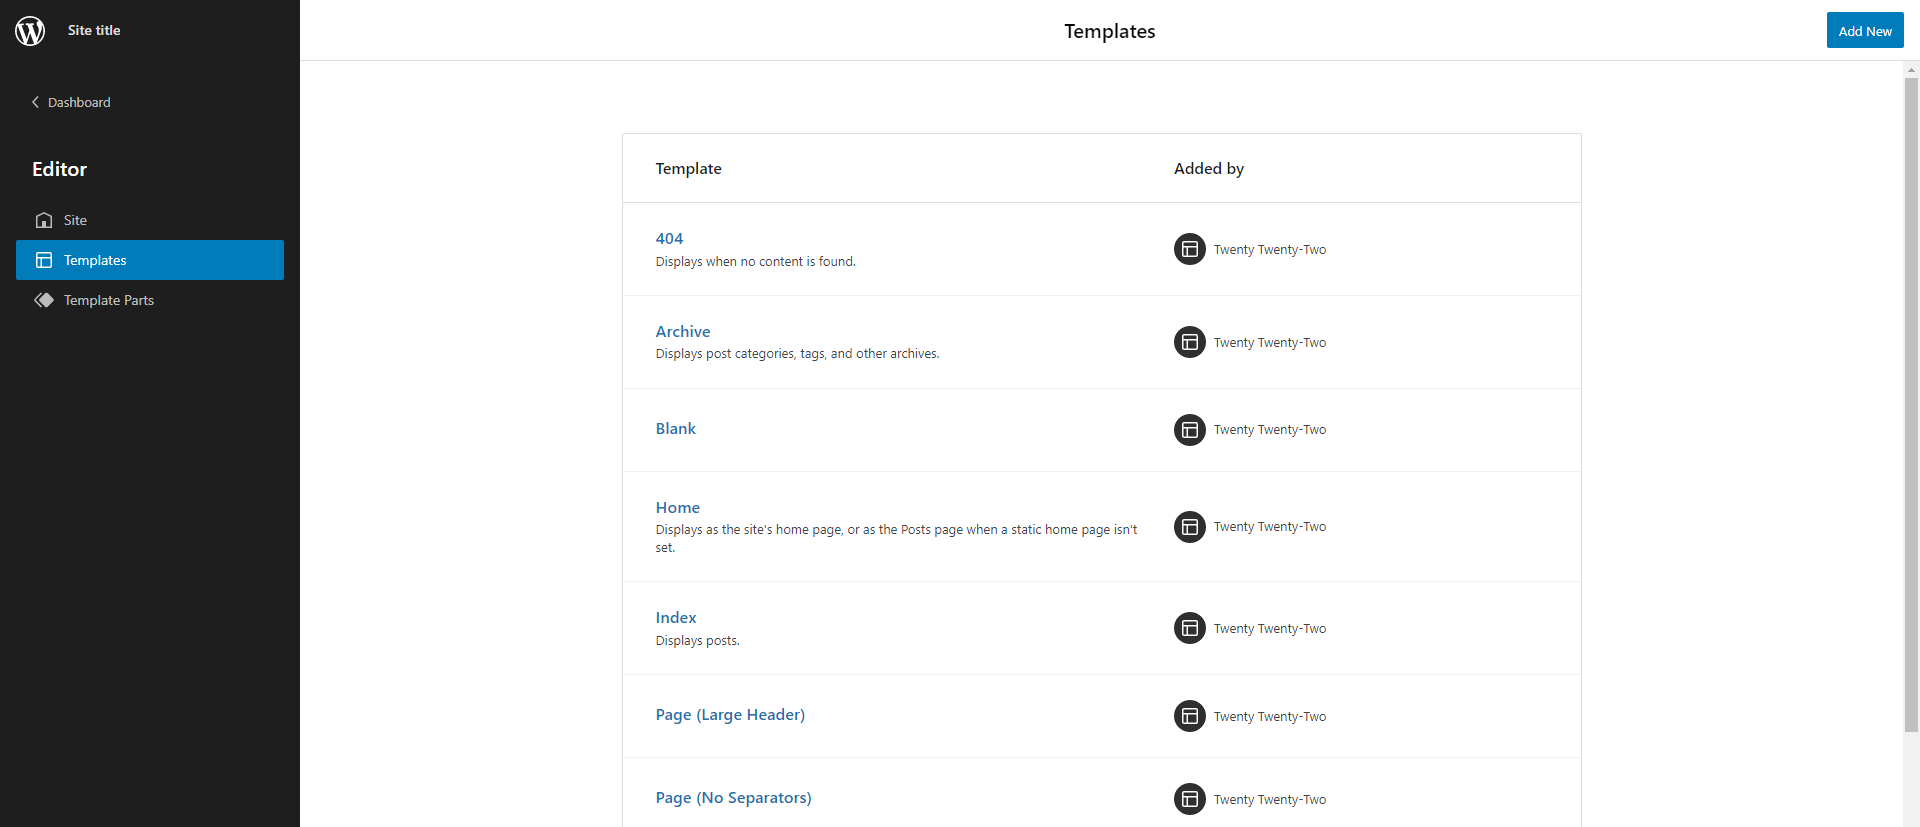 The templates list shows a list of templates including the name, description, and whom it was added by.